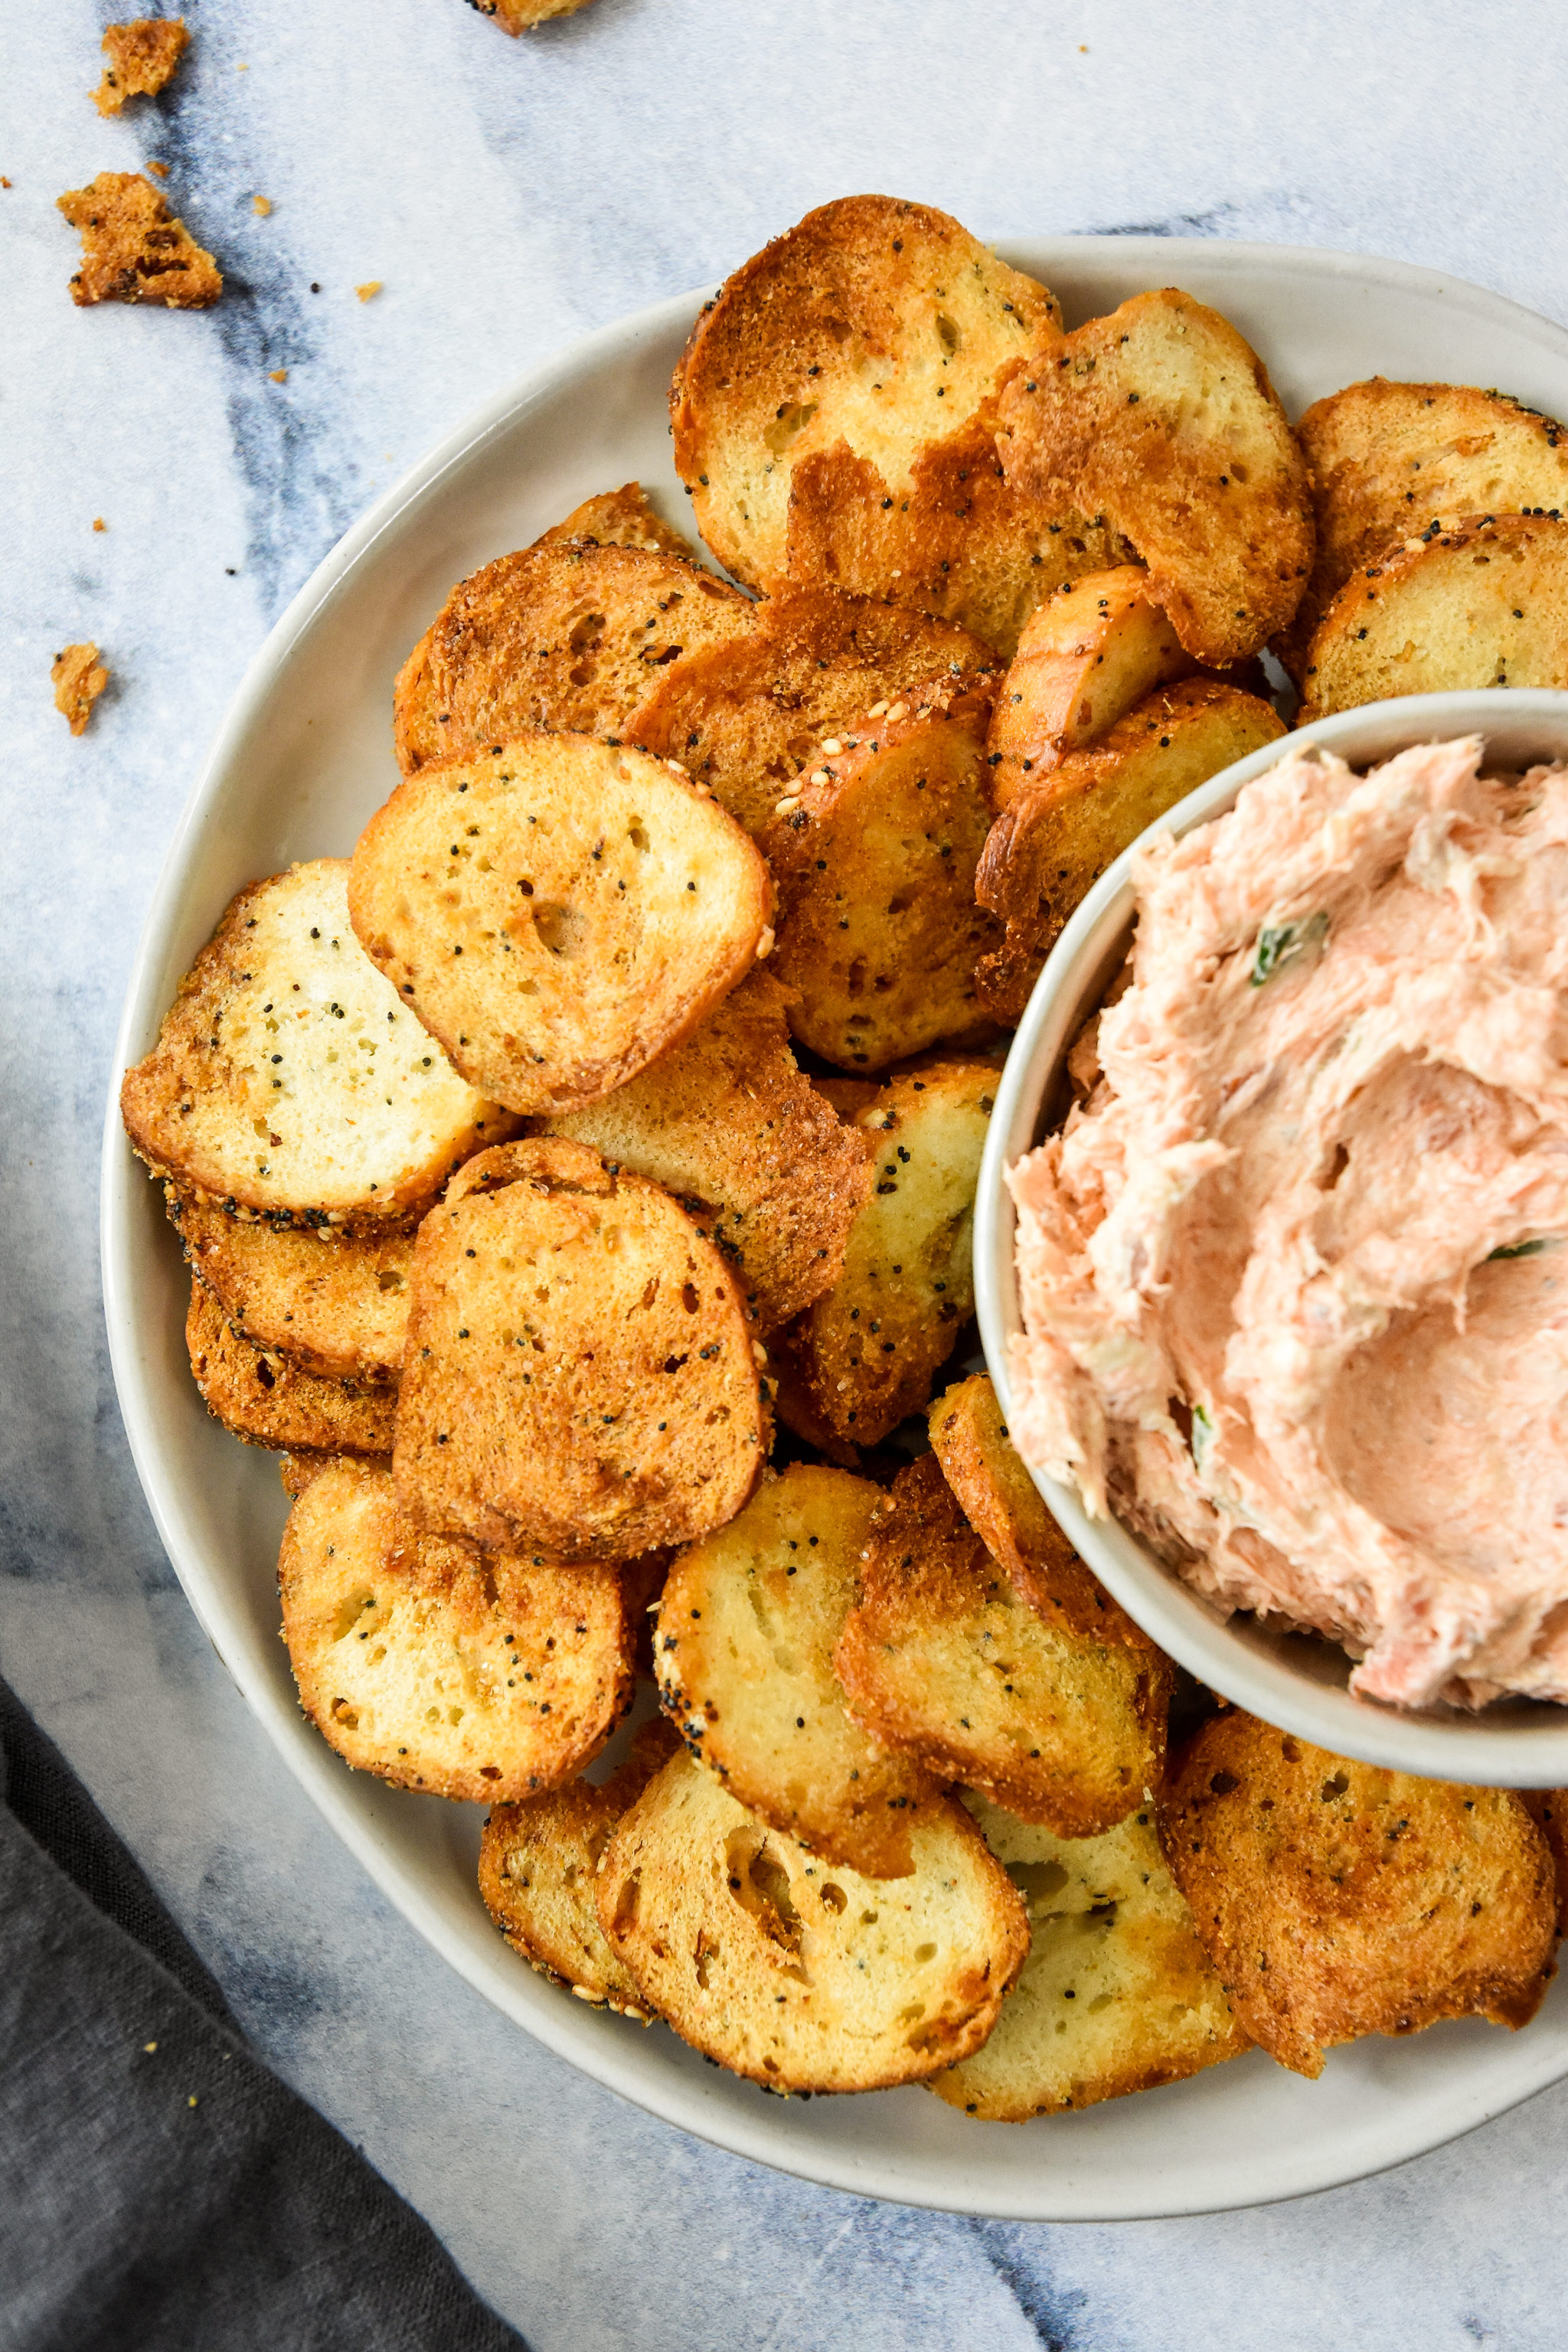 air fryer everything bagel chips on a plate with smoked salmon dip.